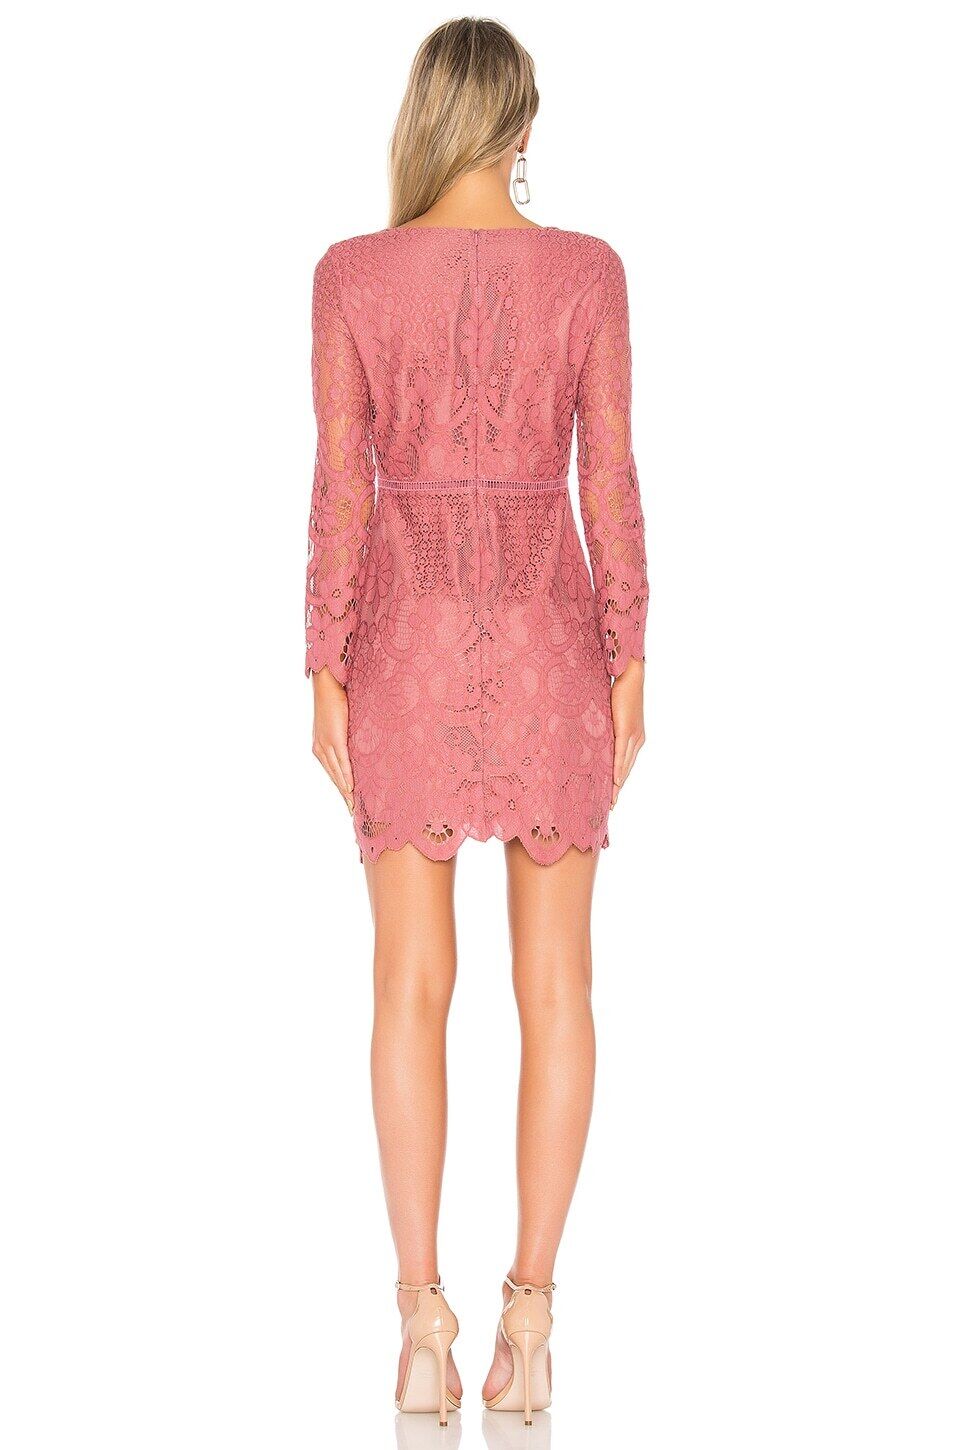 Cupcakes and Cashmere Women's Fitted Lace Makenna Dress in Deco Rose